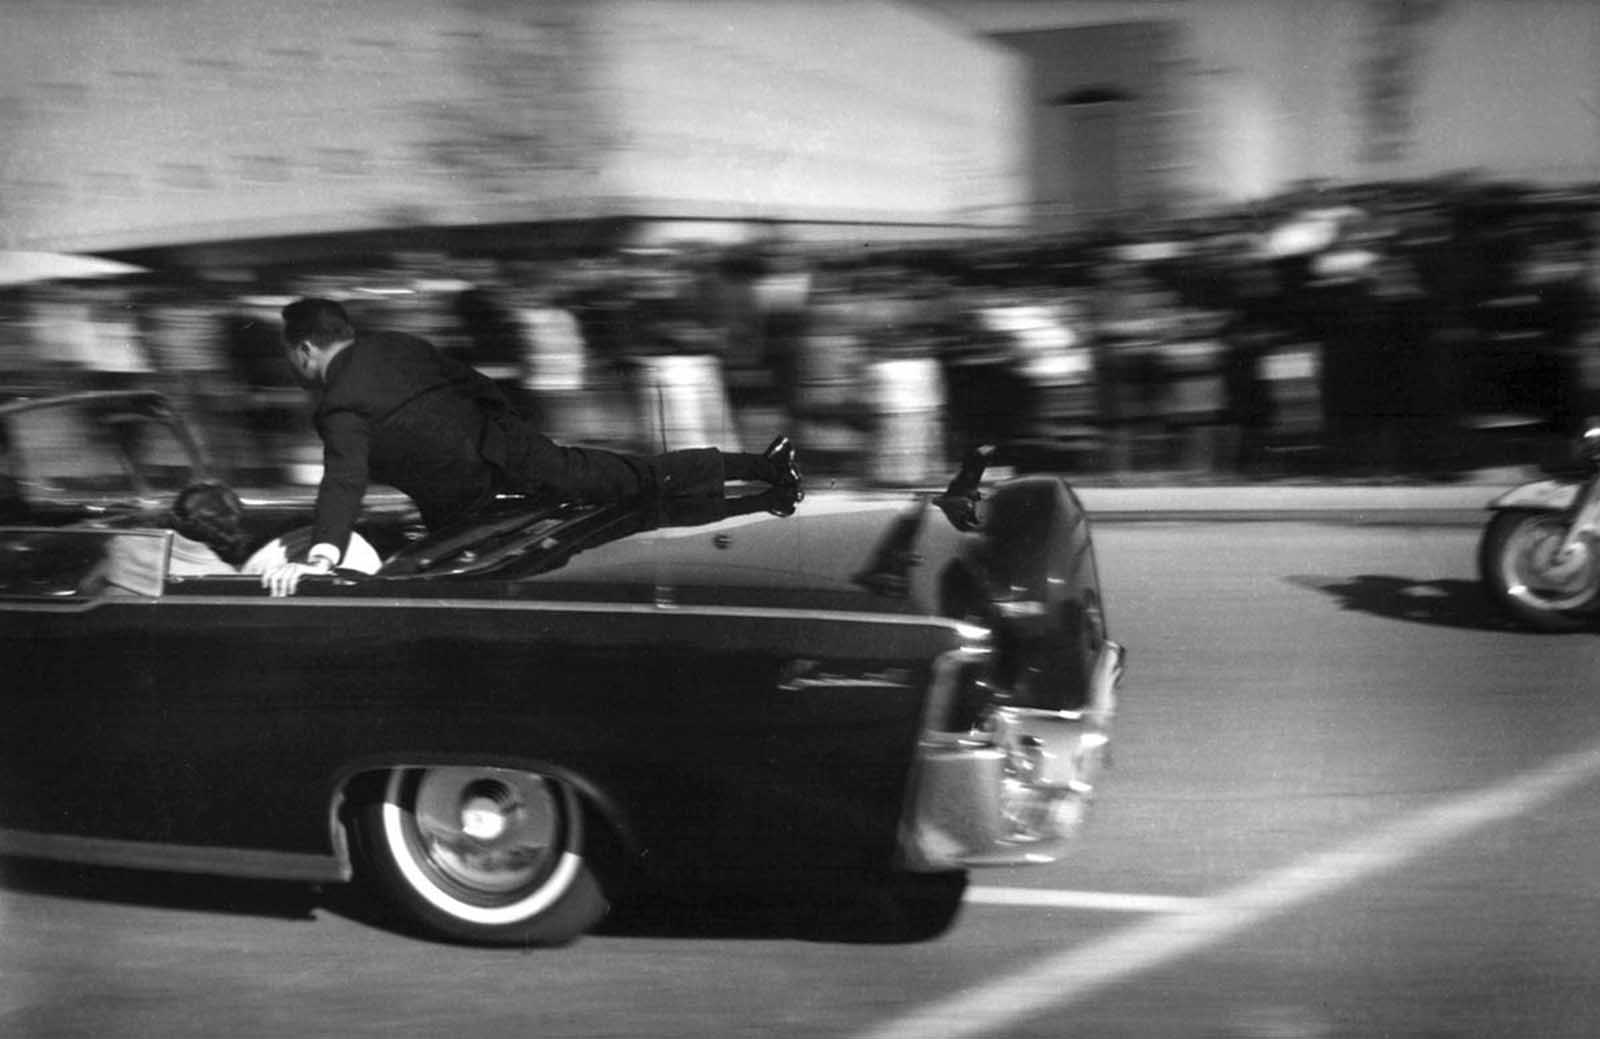 Seconds after shots rang out, the limousine carrying the mortally wounded President John F. Kennedy races toward the hospital in Dallas, Texas, on November 22, 1963. Secret Service agent Clinton Hill is riding on the back of the car, Nellie Connally, wife of Texas Gov. John Connally, bends over her wounded husband, and first lady Jacqueline Kennedy leans over the president. 